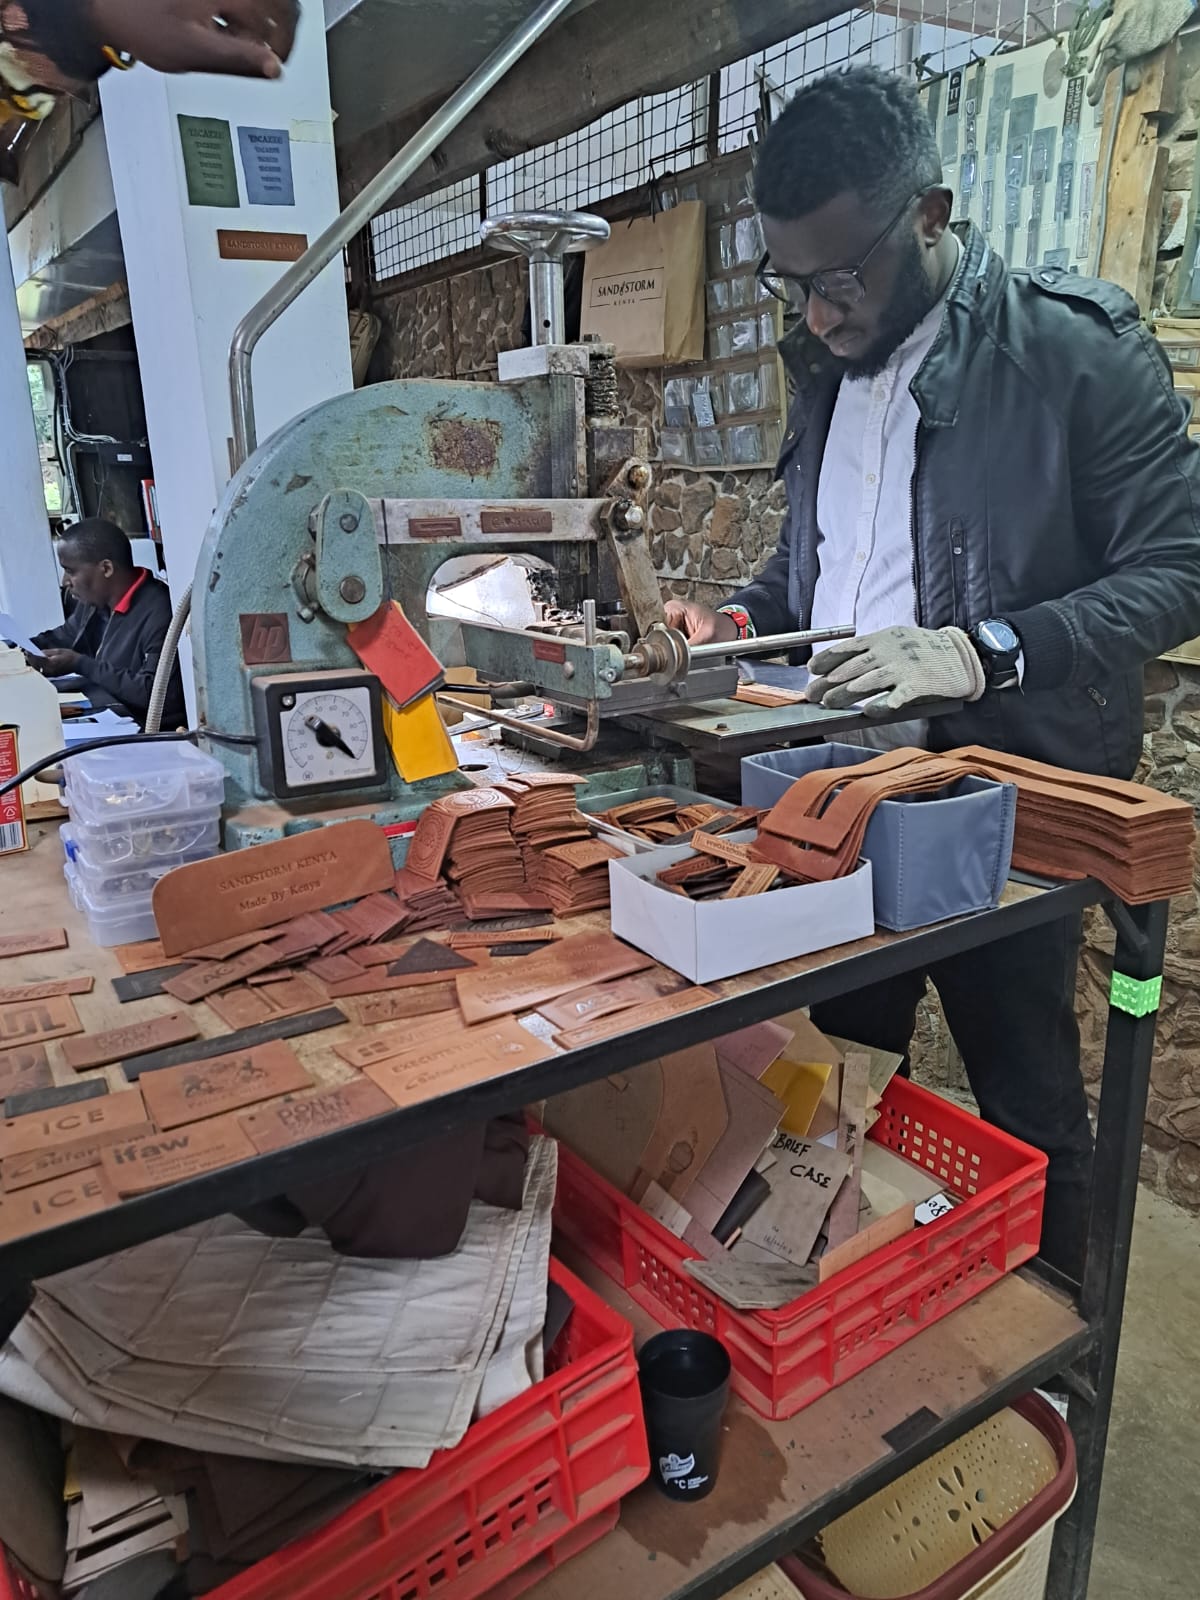 One of the talented craftsman at Sandstorm shows us how they emboss the leather